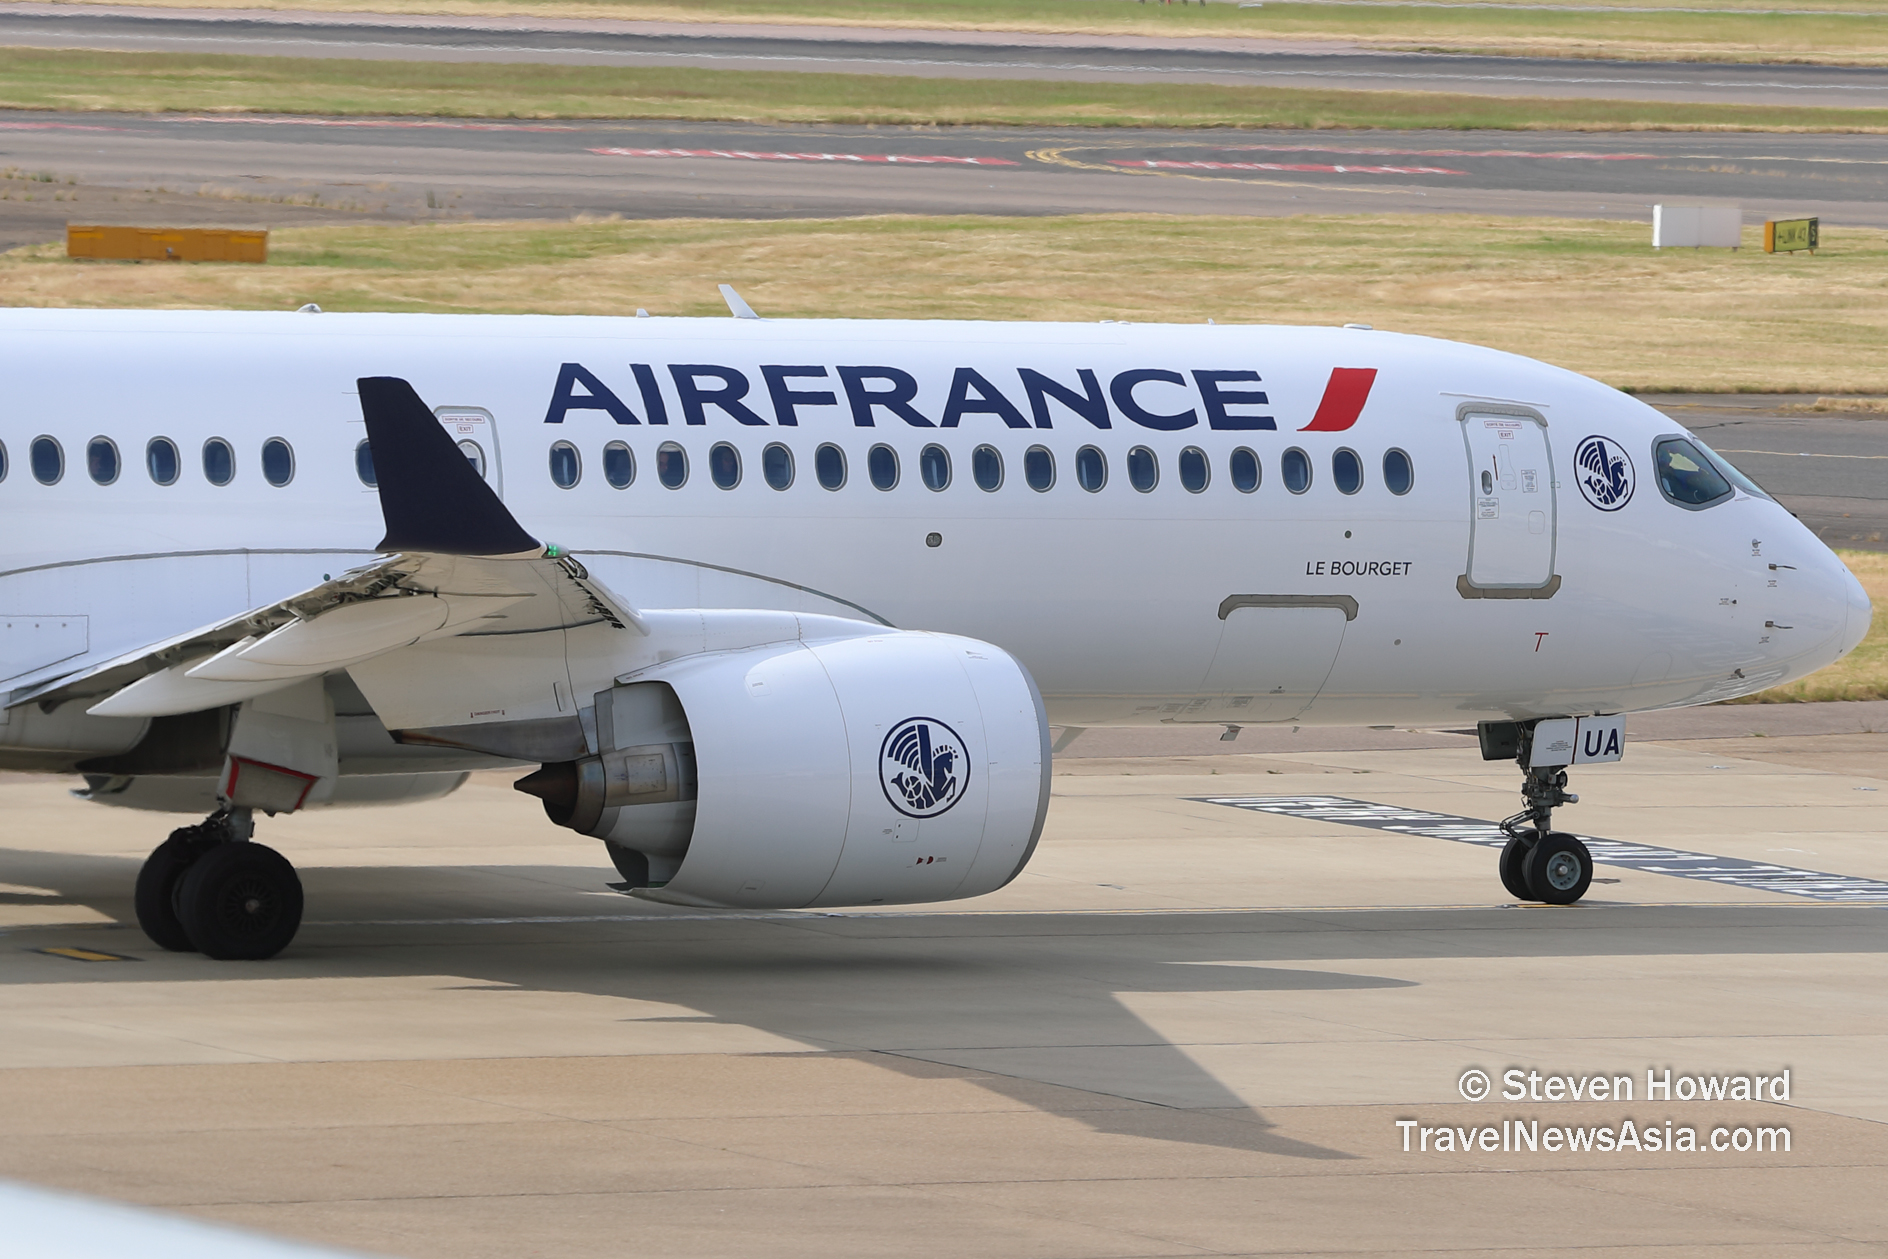 Air France Airbus A220-300 reg: F-HZUA. Picture by Steven Howard of TravelNewsAsia.com Click to enlarge.